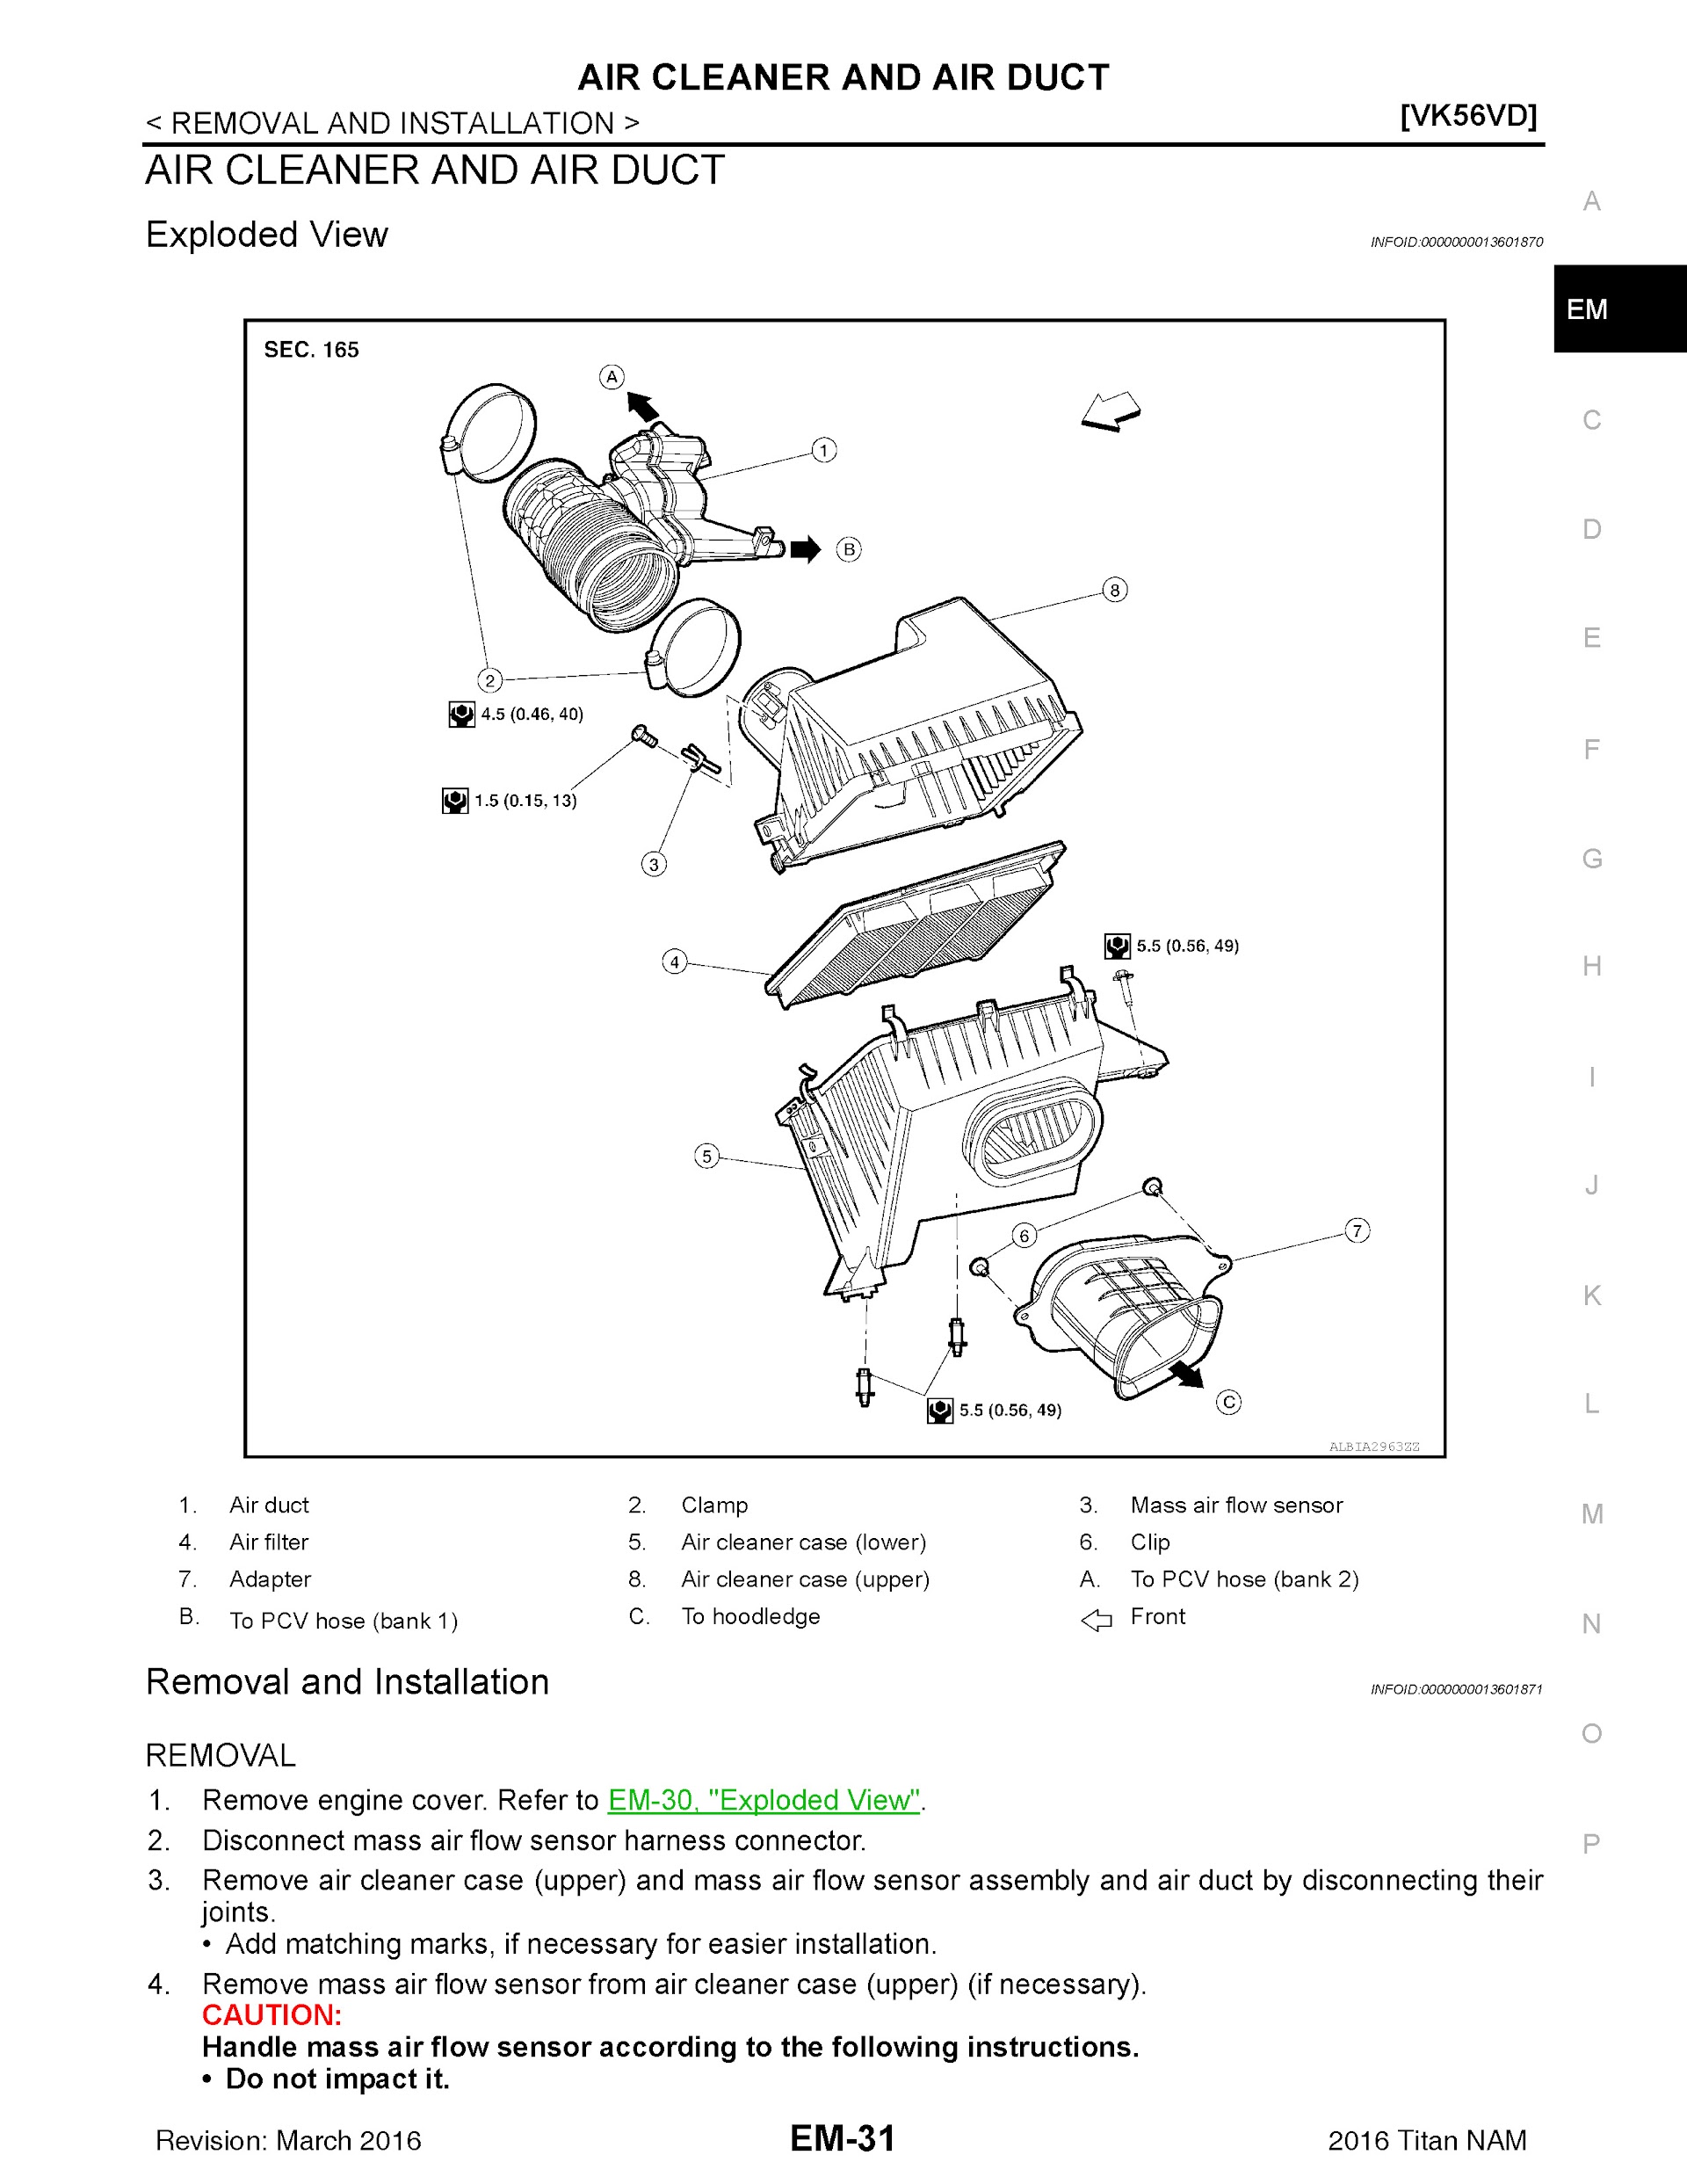 2015 Nissan Titan Repair Manual, air Cleaner and Air Duct Removal and Installation